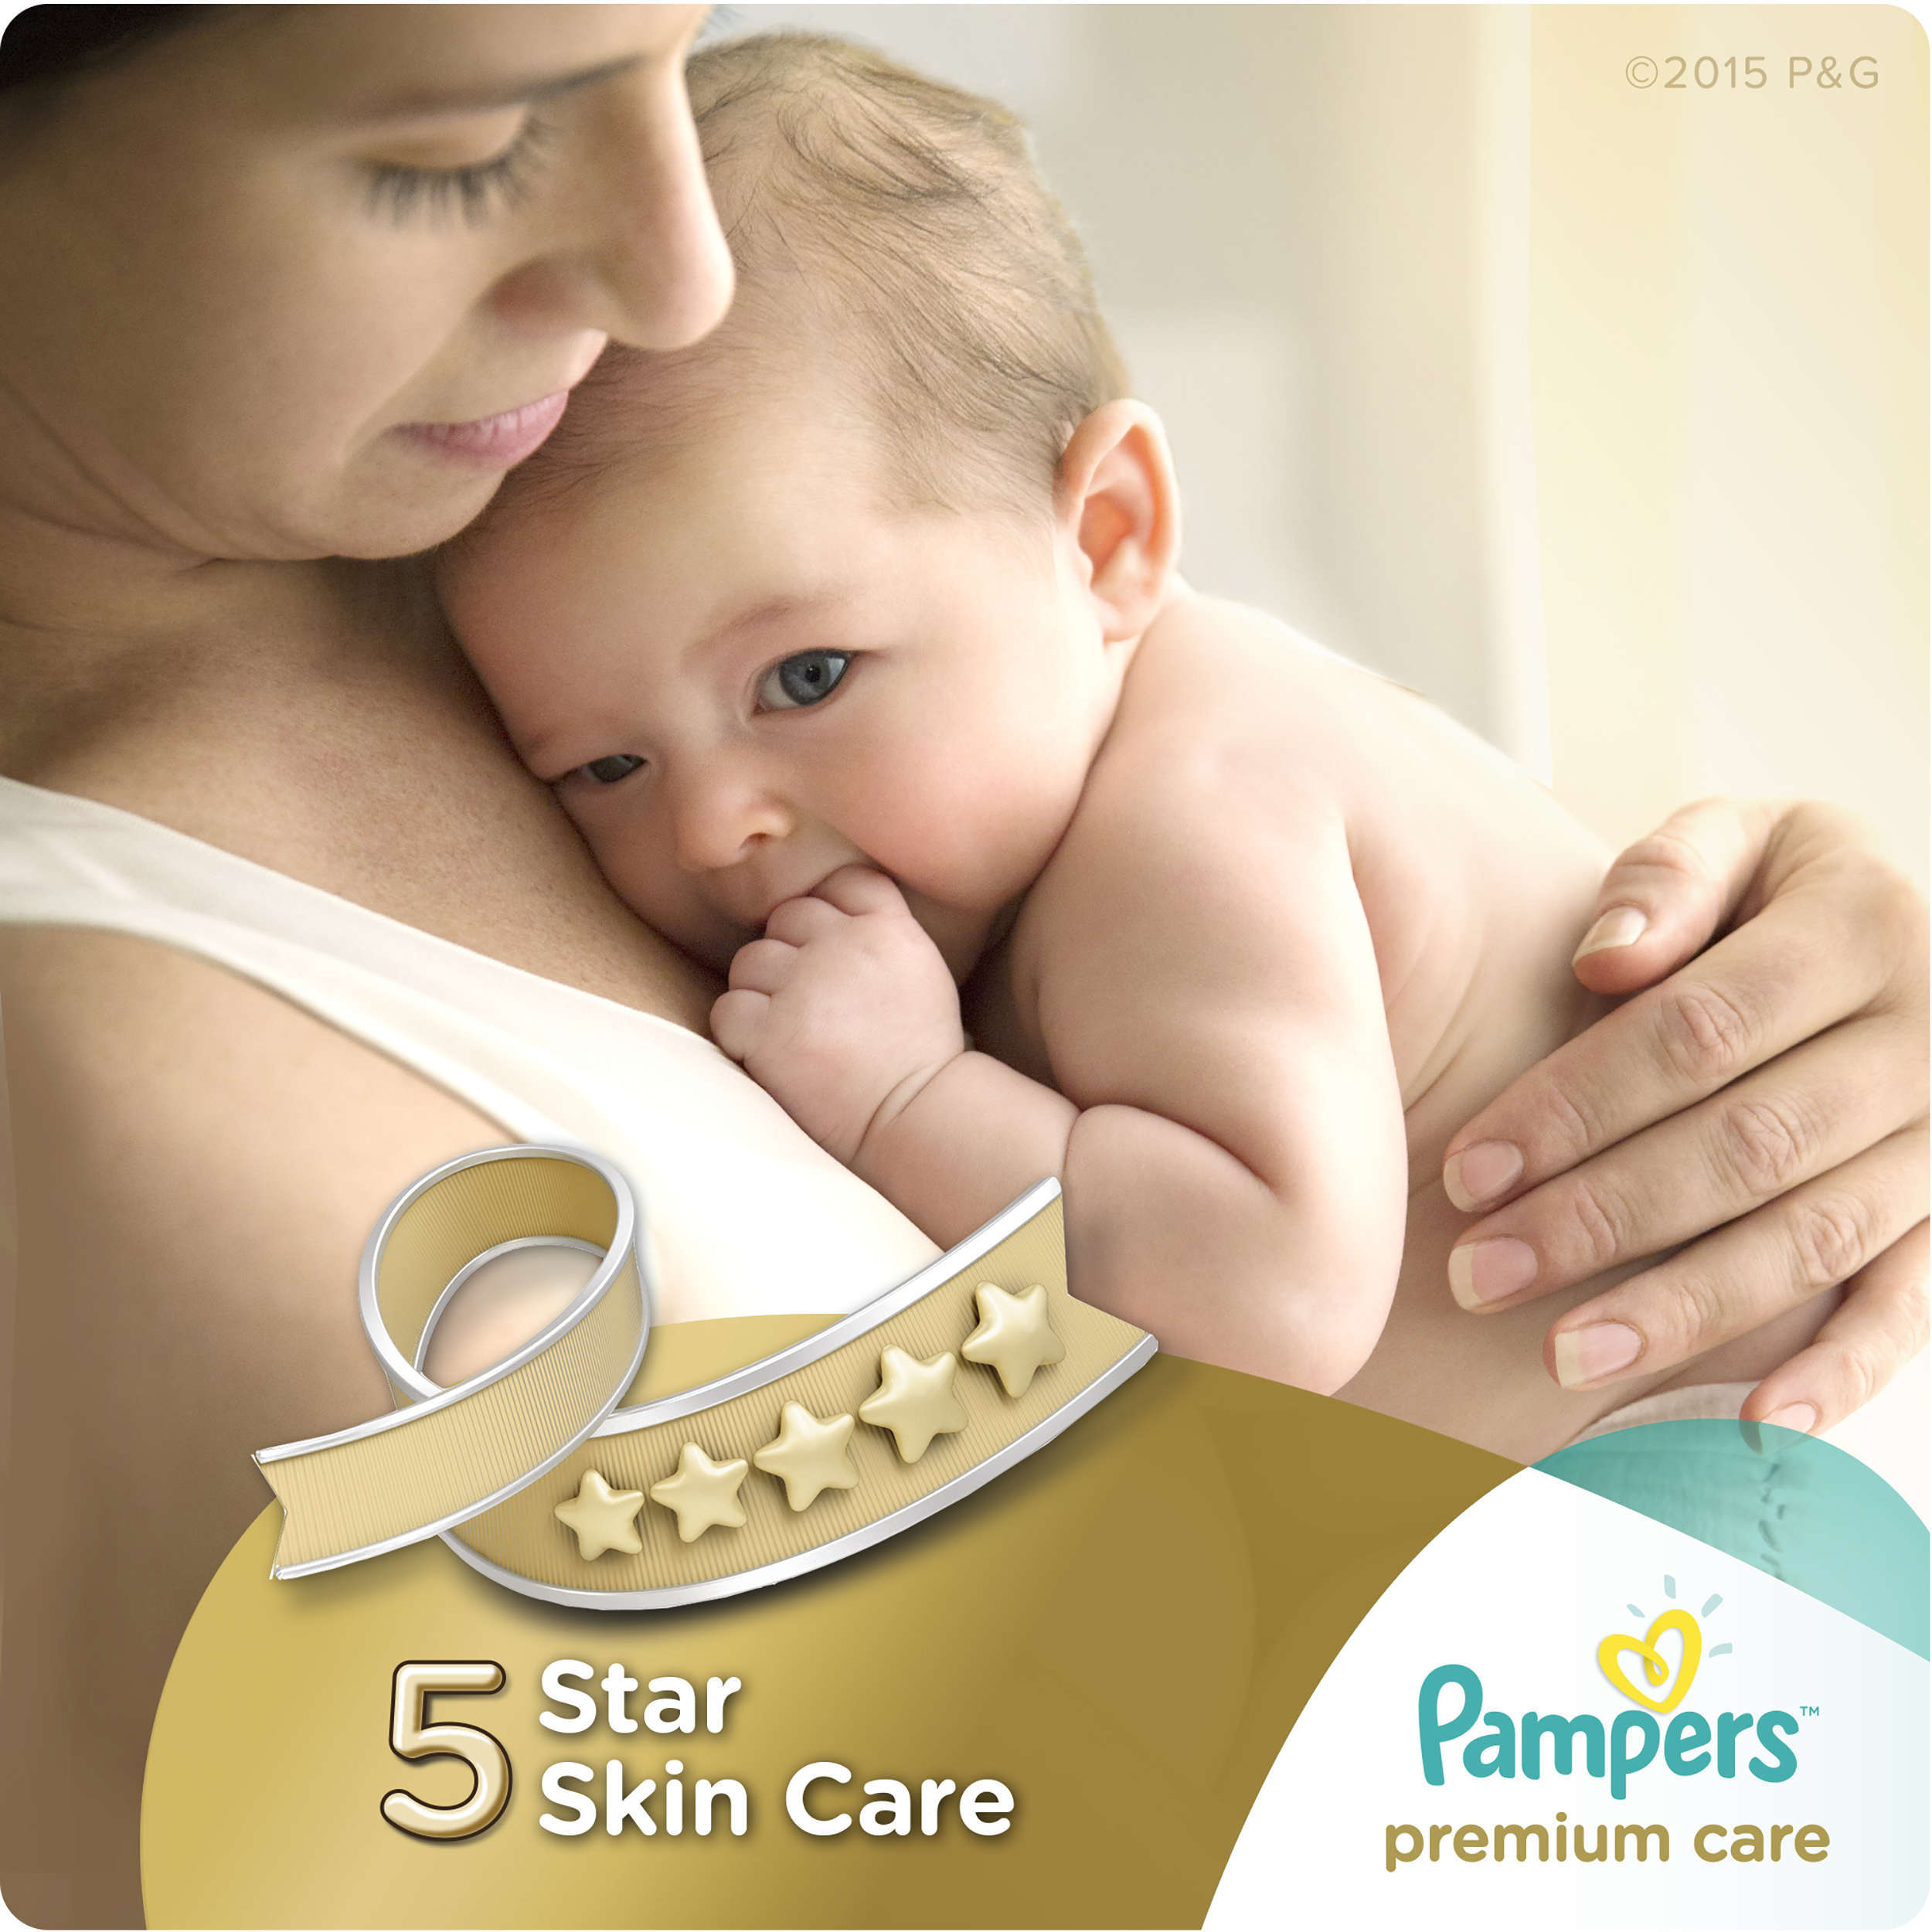 Pampers Premium Care Diapers (Choose Size and Count) - image 3 of 11